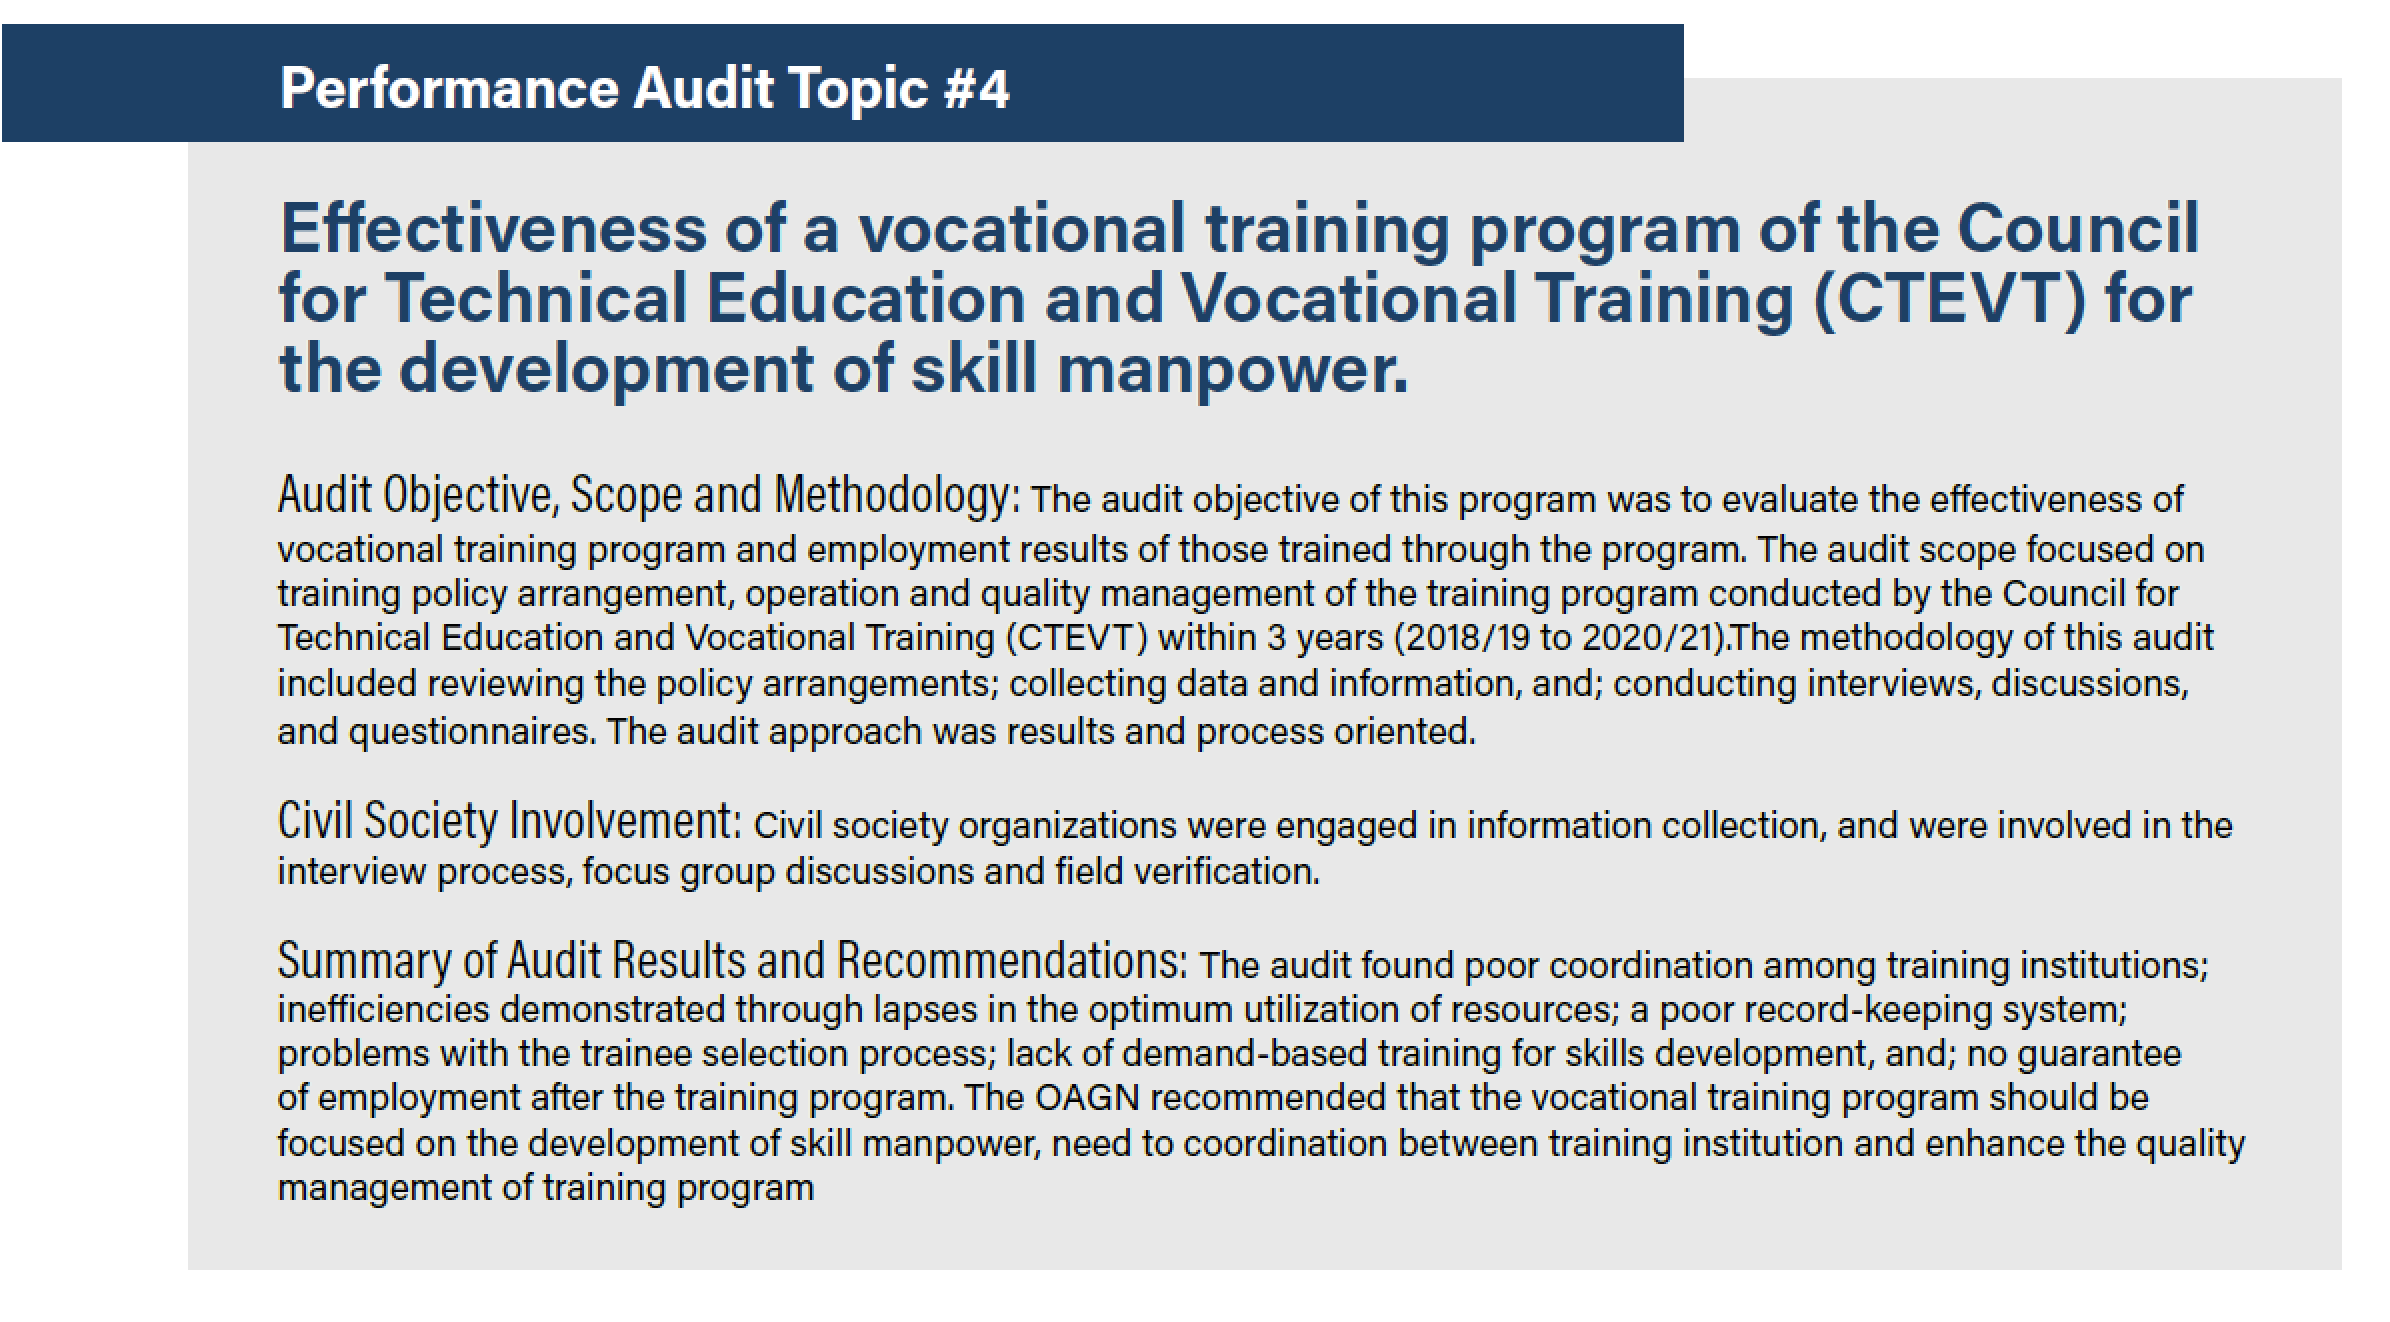 Effectiveness of a vocational training program of the Council for Technical Education and Vocational Training (CTEVT) for the development of skill manpower.